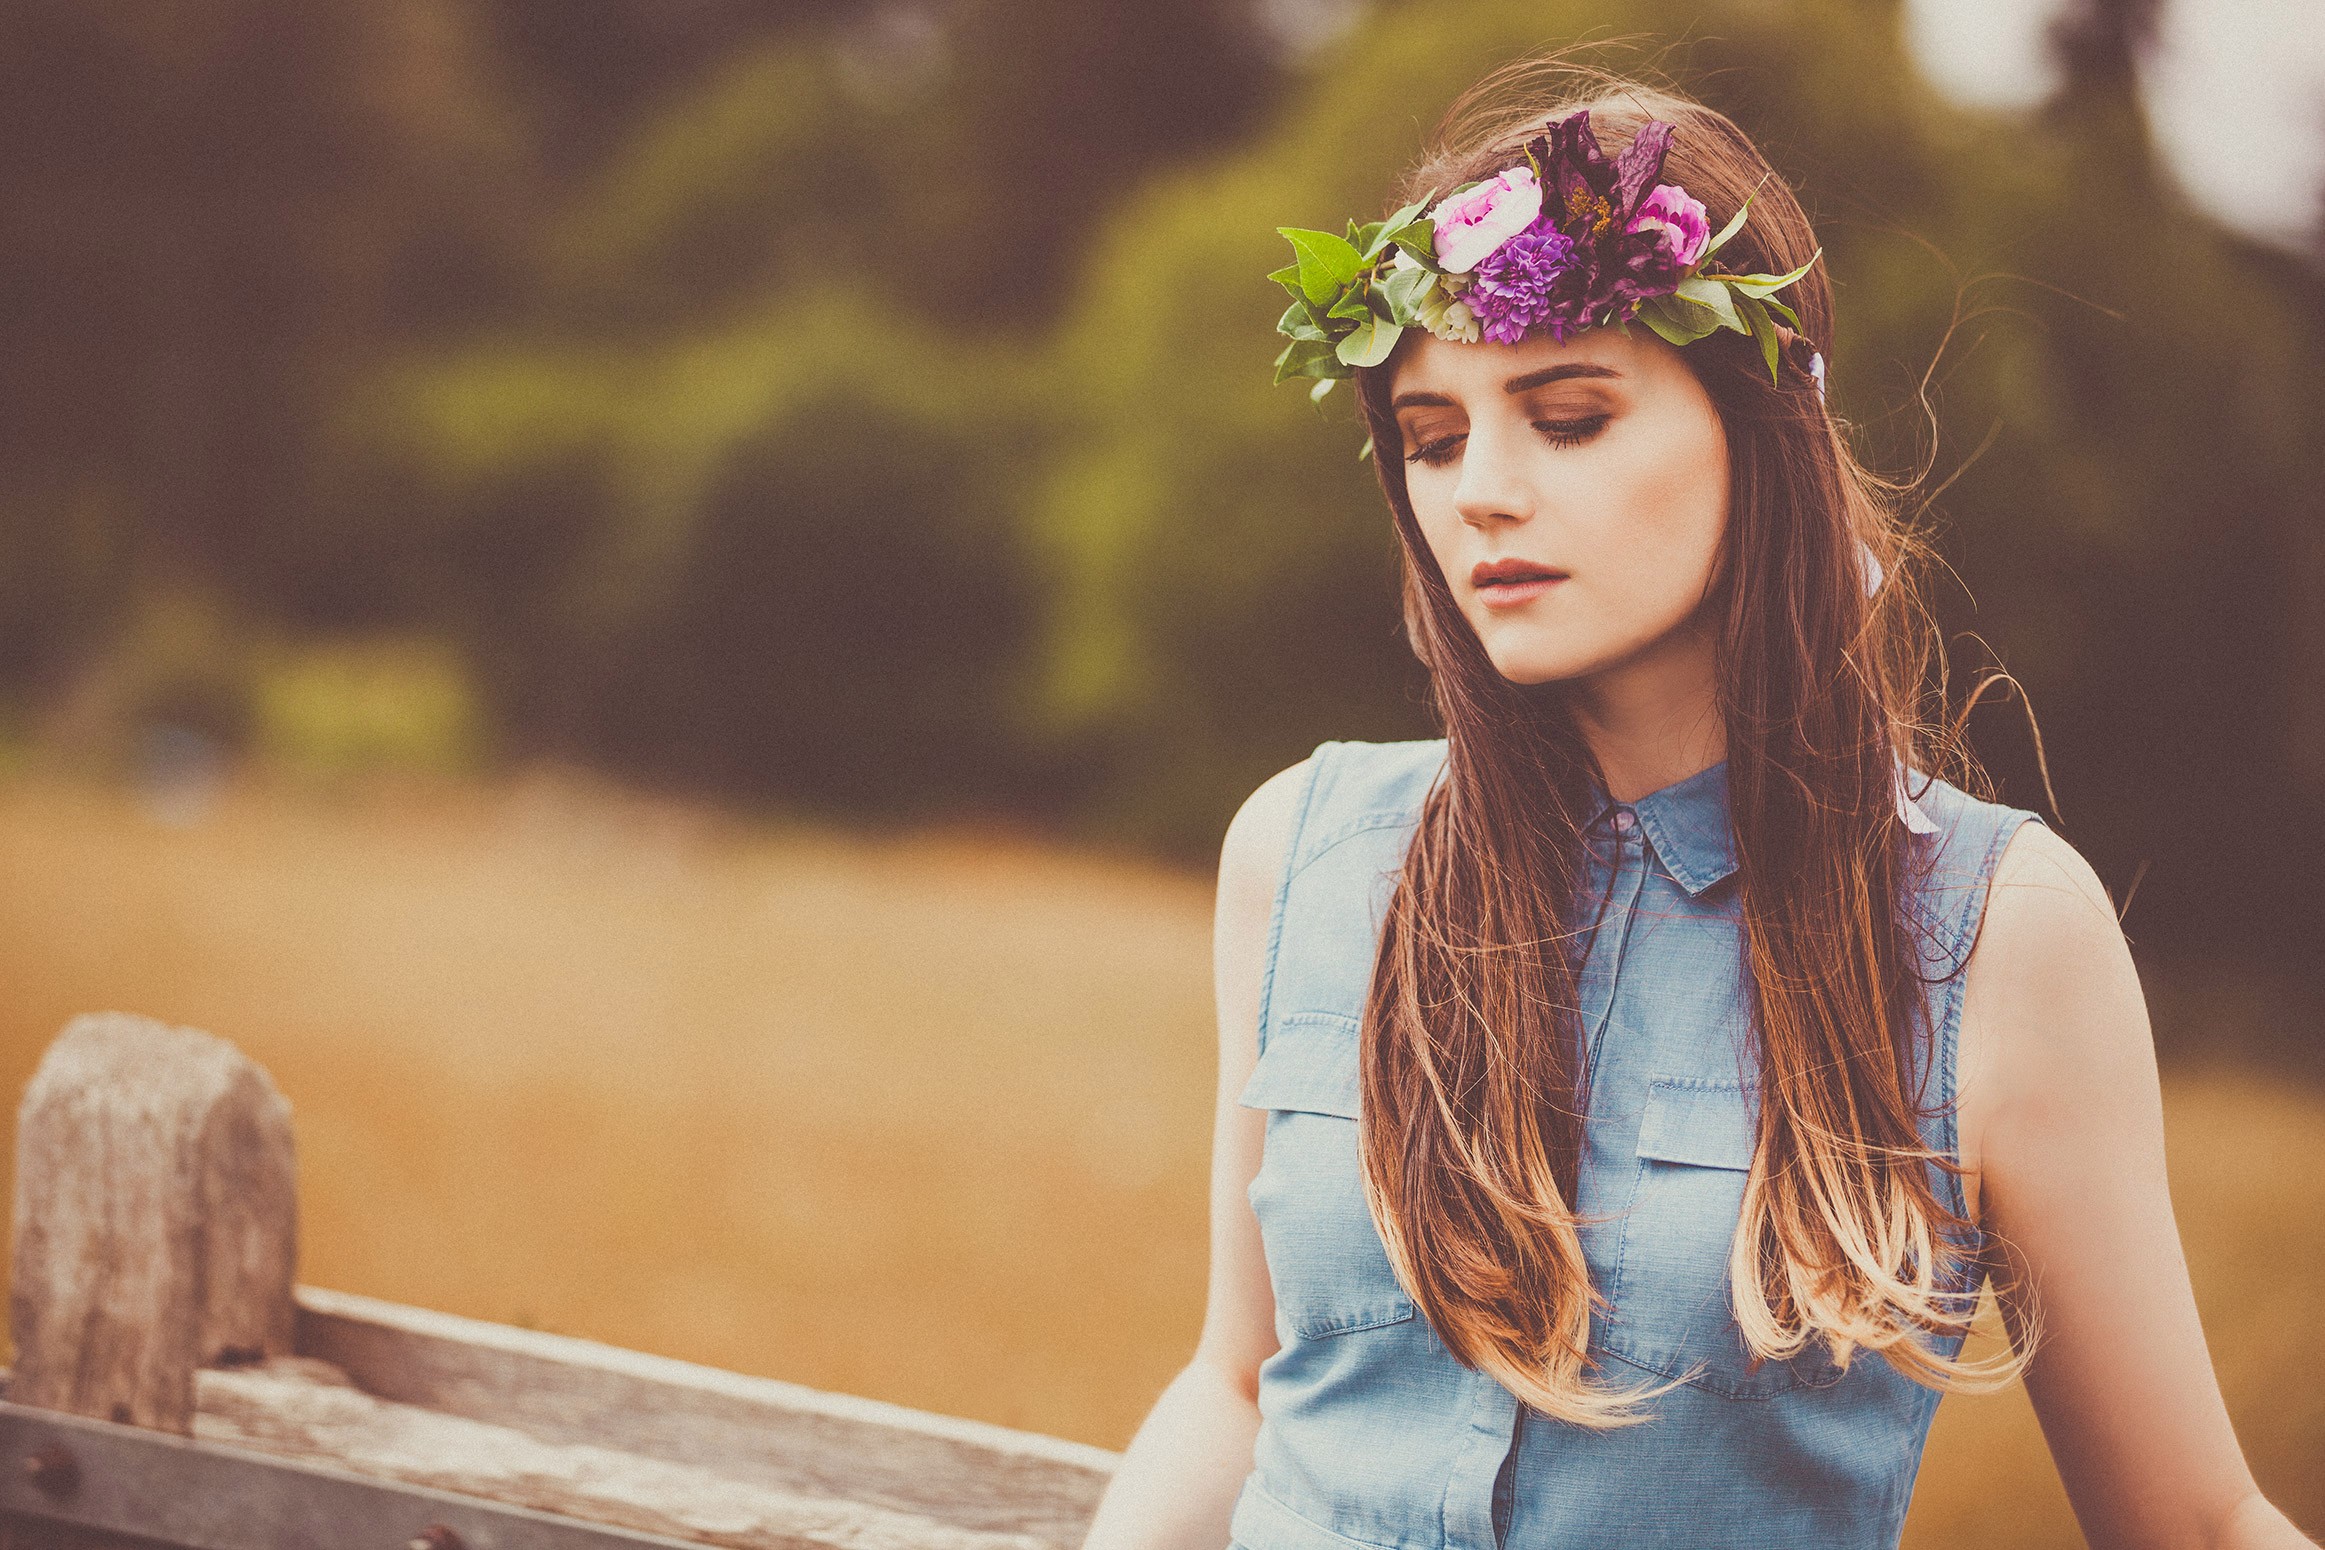 lilah-parsons-ruth-rose-horse-field-shoot-fashion-photography-9